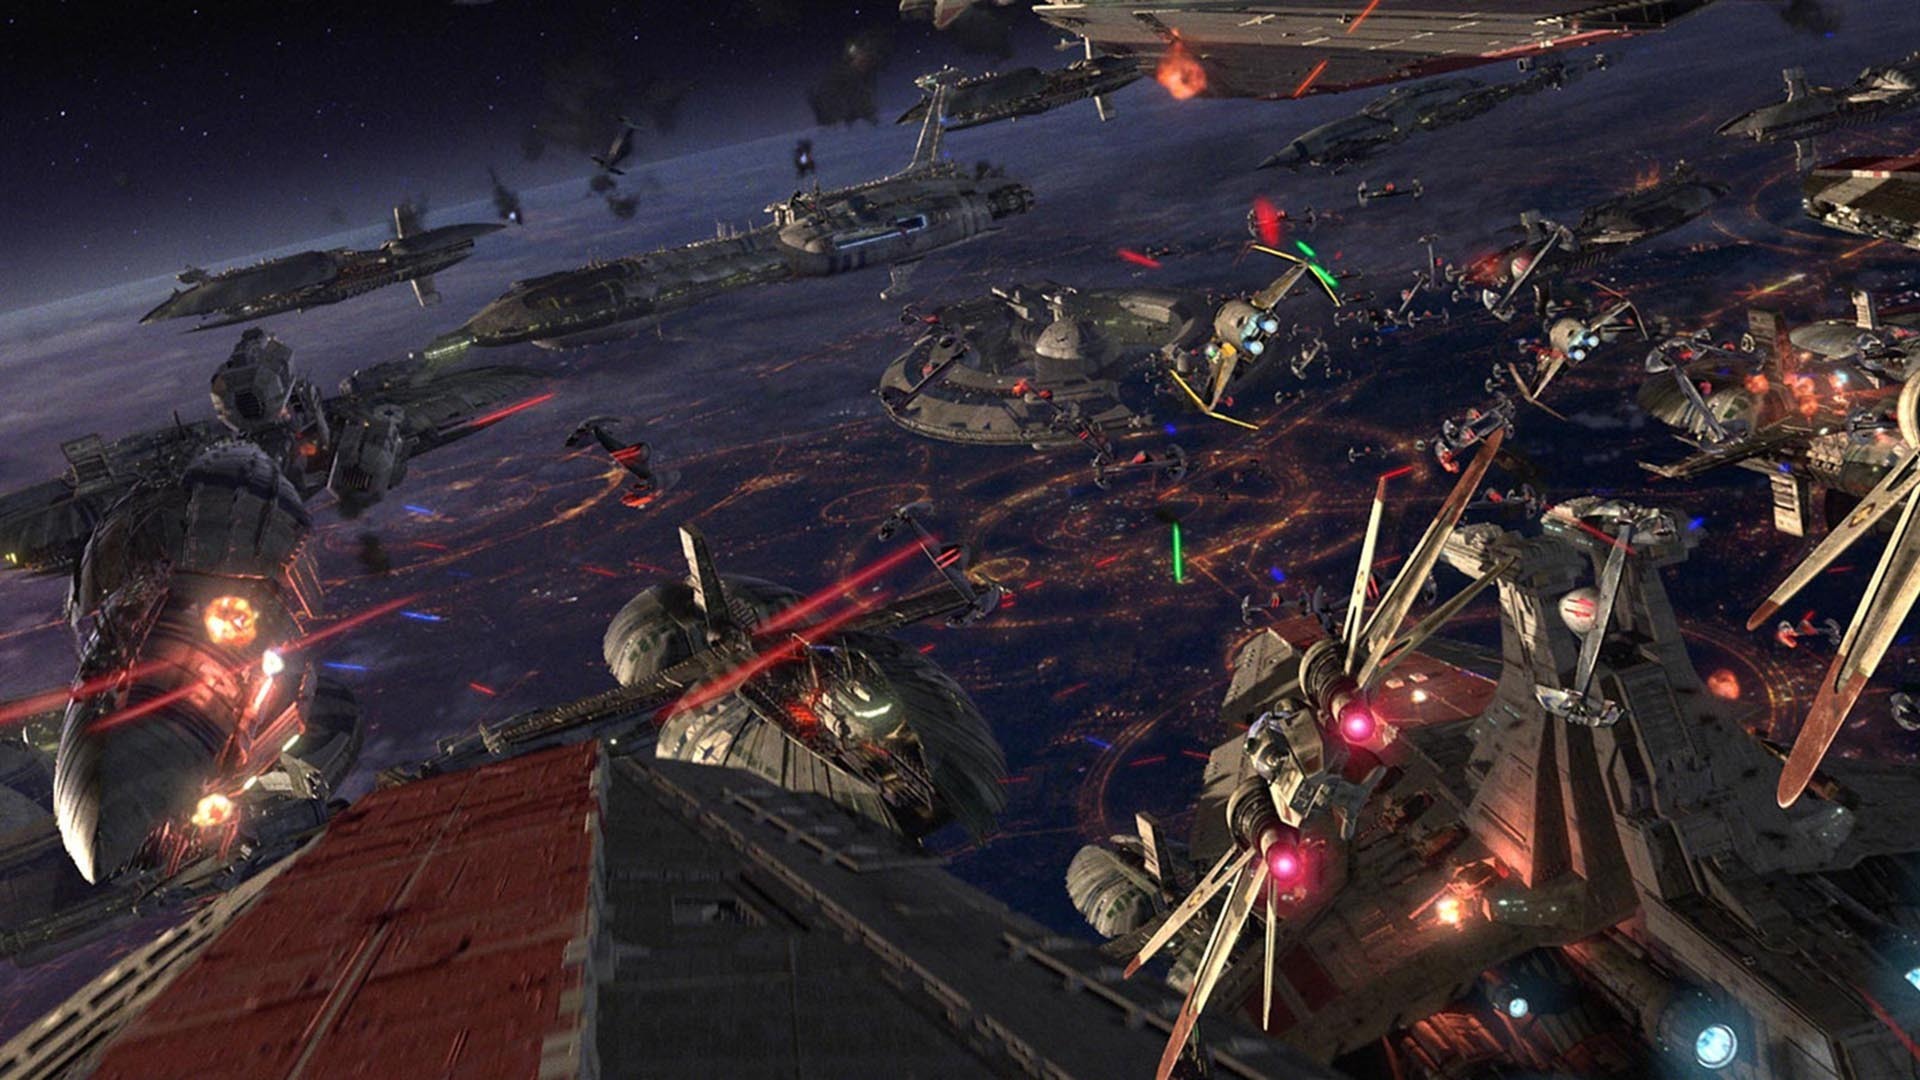 Star Wars Ep. III: Revenge of the Sith for mac download